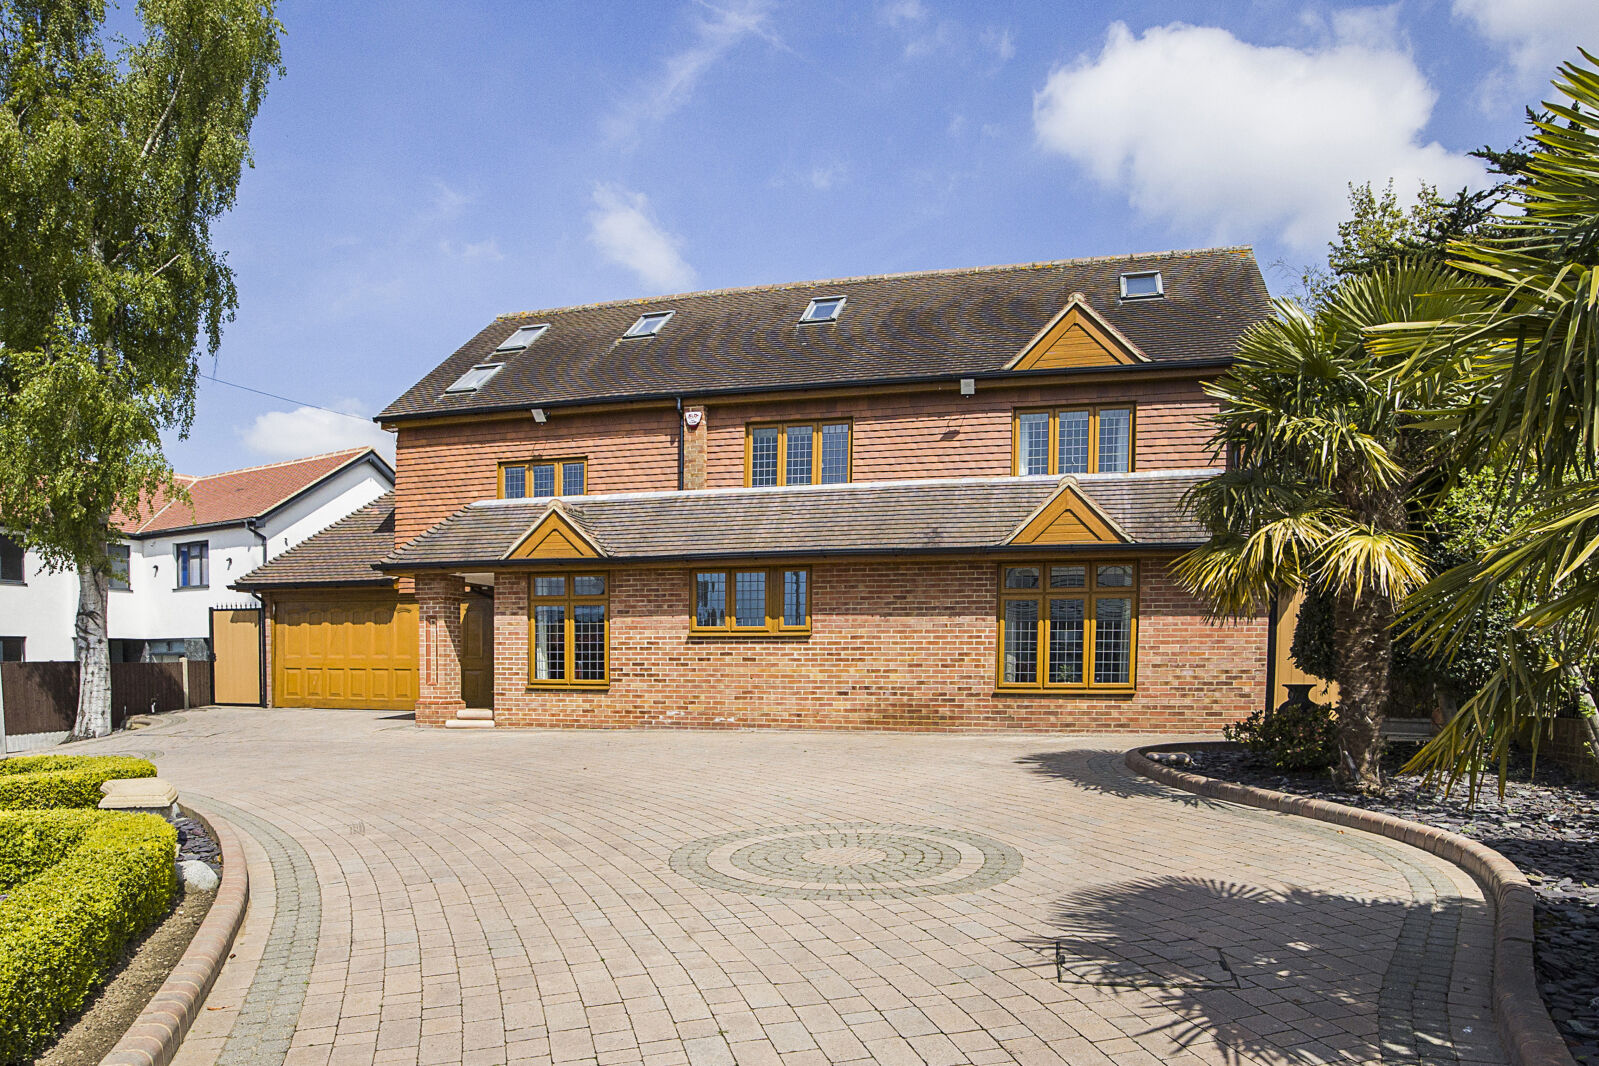 5 bedroom detached house for sale West View, Loughton, IG10, main image